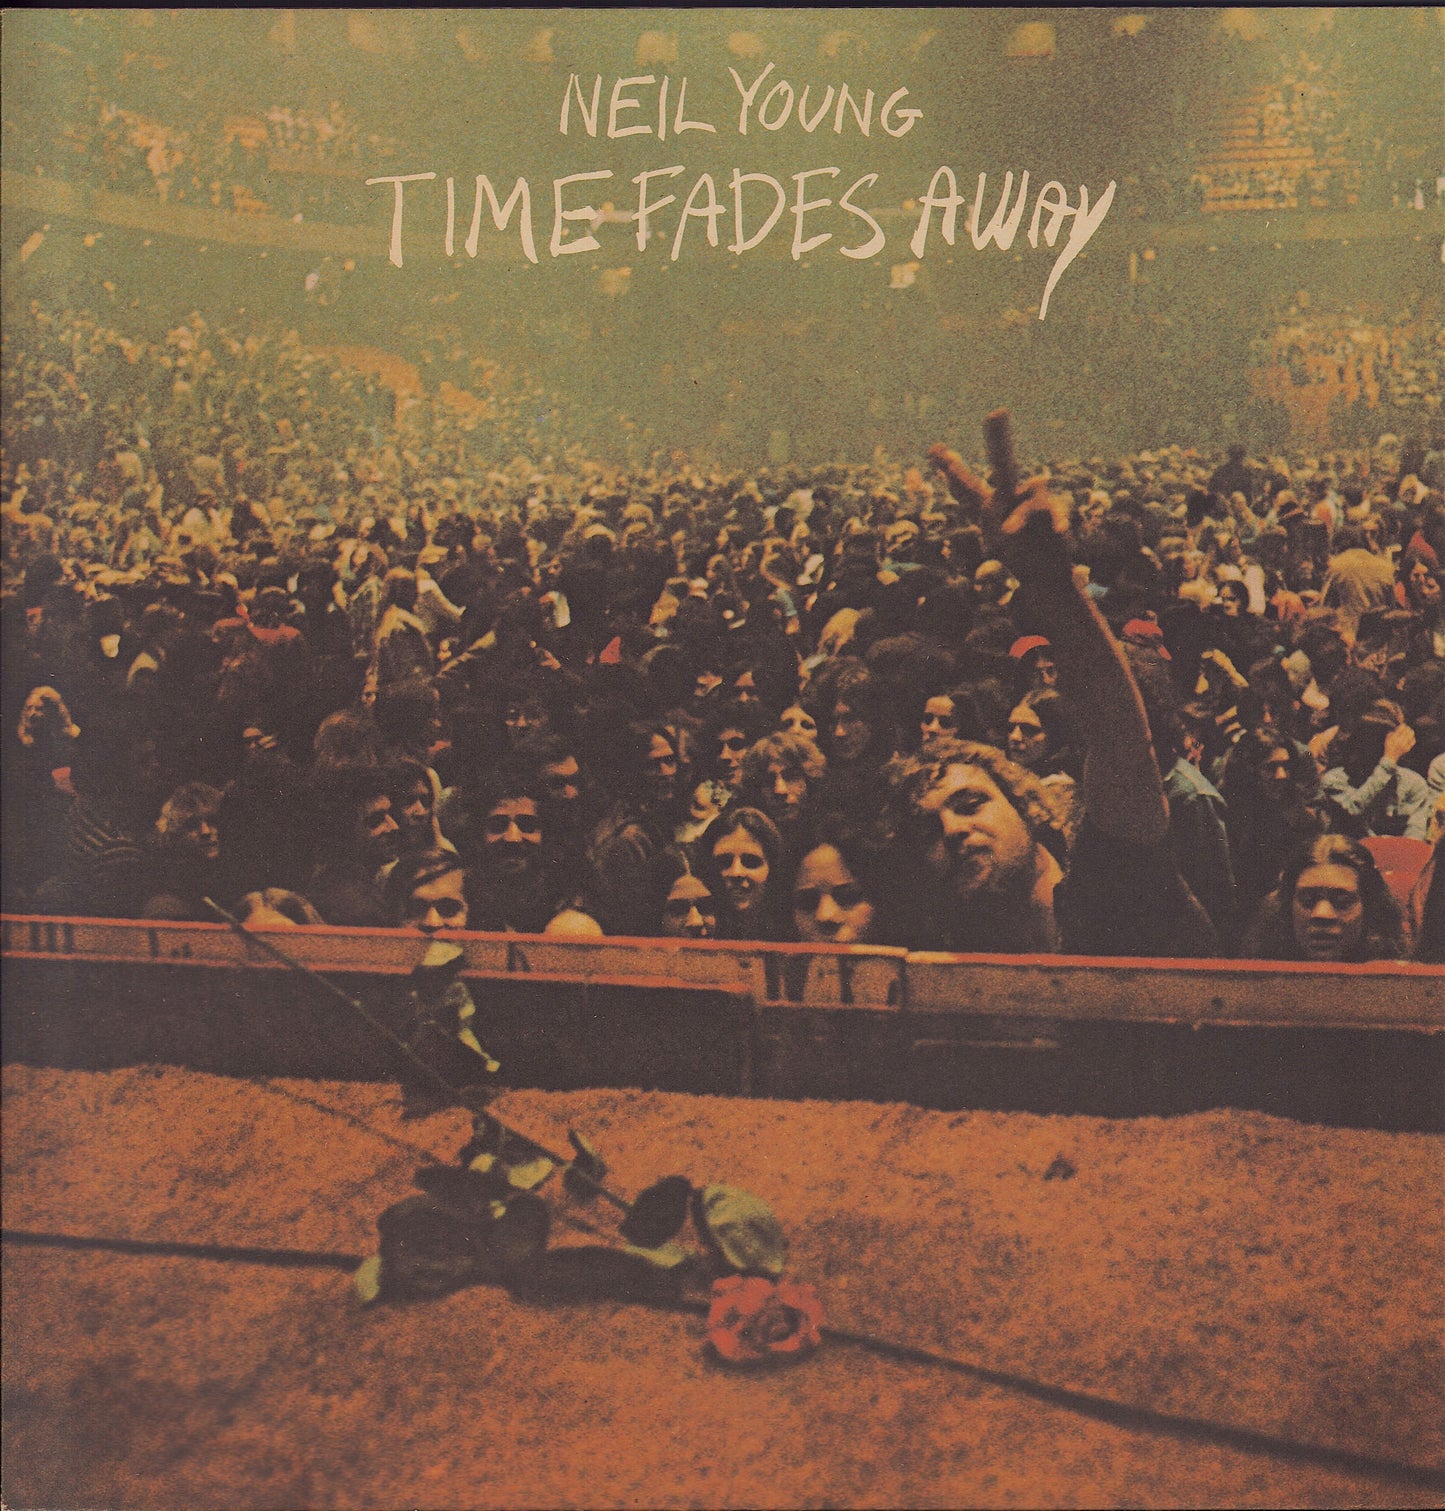 Neil Young - Time Fades Away (Vinyl LP)